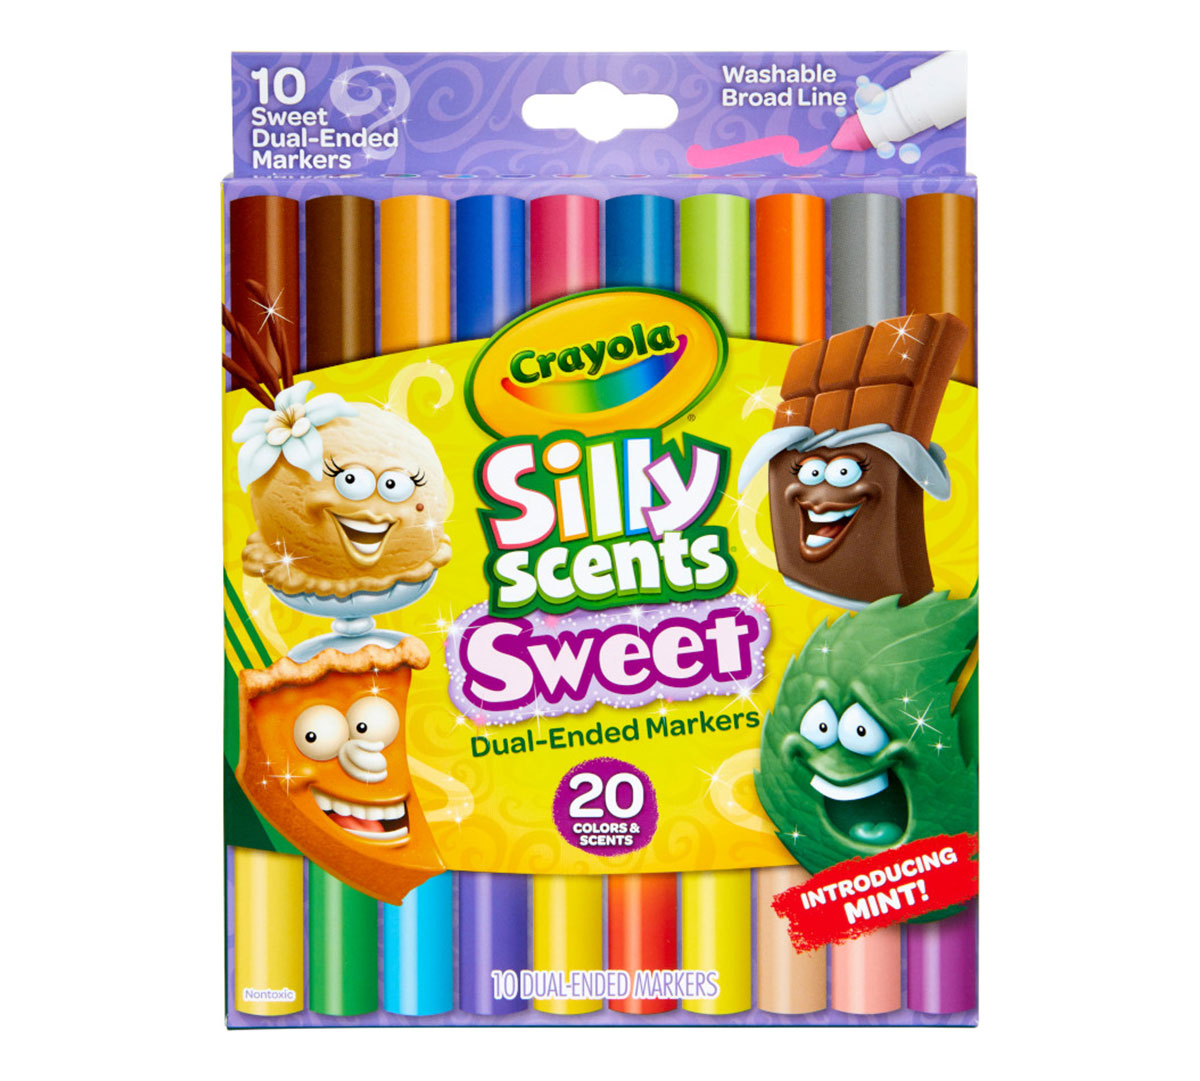 Silly Scents Sweet Dual Ended Markers, 10 Count